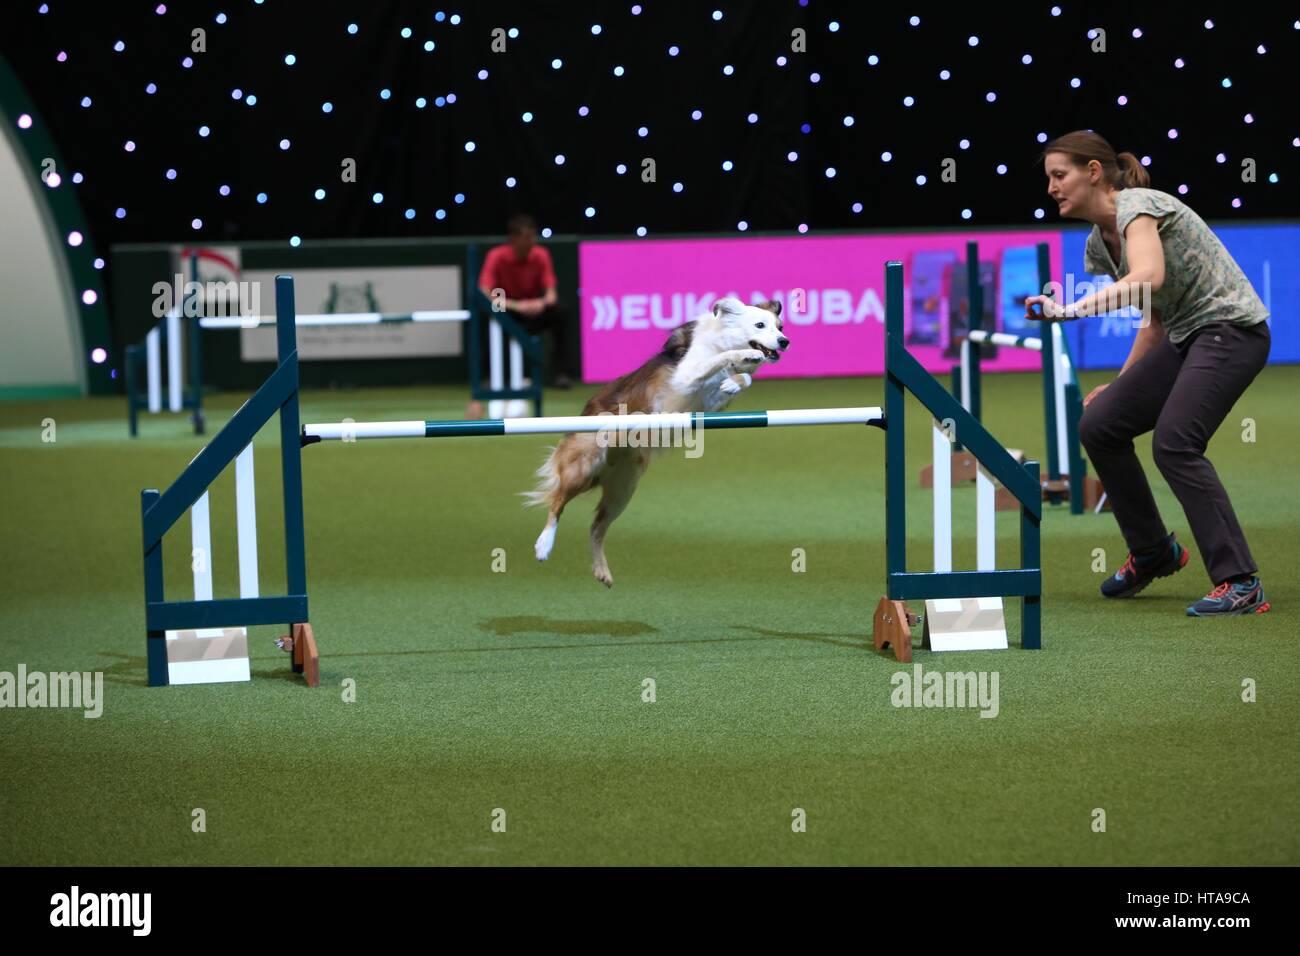 Crufts, Birmingham, UK. 9th Mar, 2017. The world's largest dog show, Crufts, takes place in Birmingham with dogs of all shapes & sizes. Credit: Jon Freeman/Alamy Live News Stock Photo